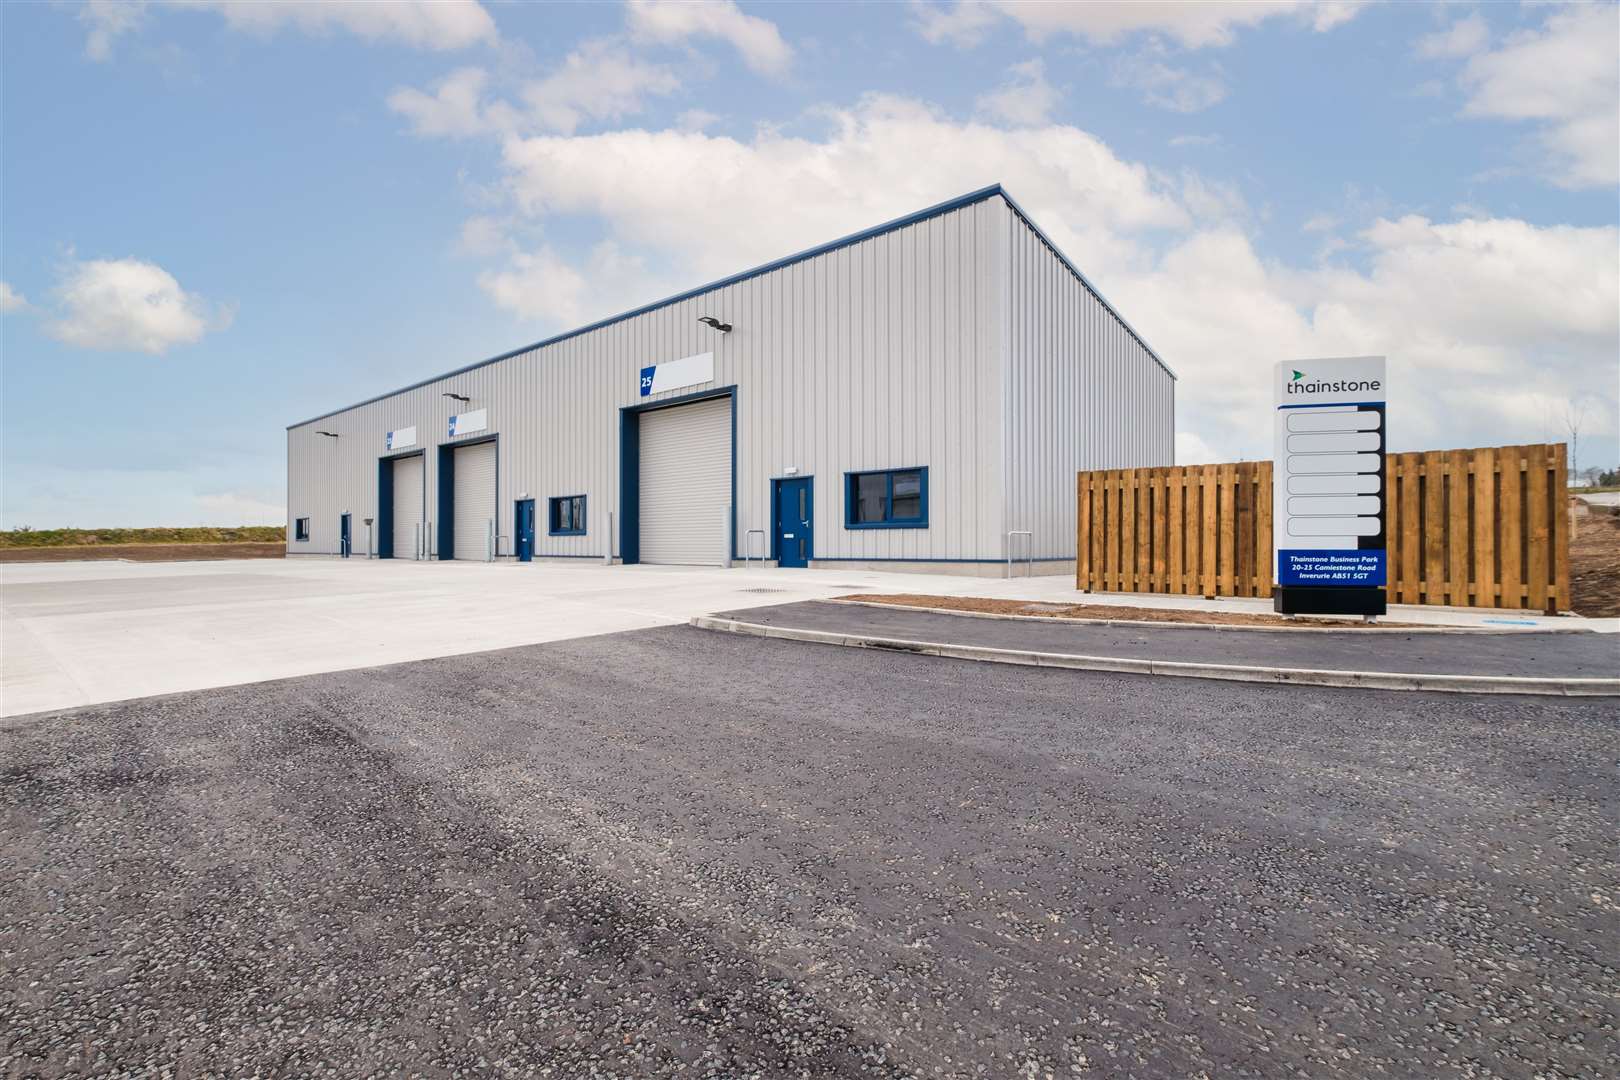 Moer firms have moved into the Thainstone Business Park.